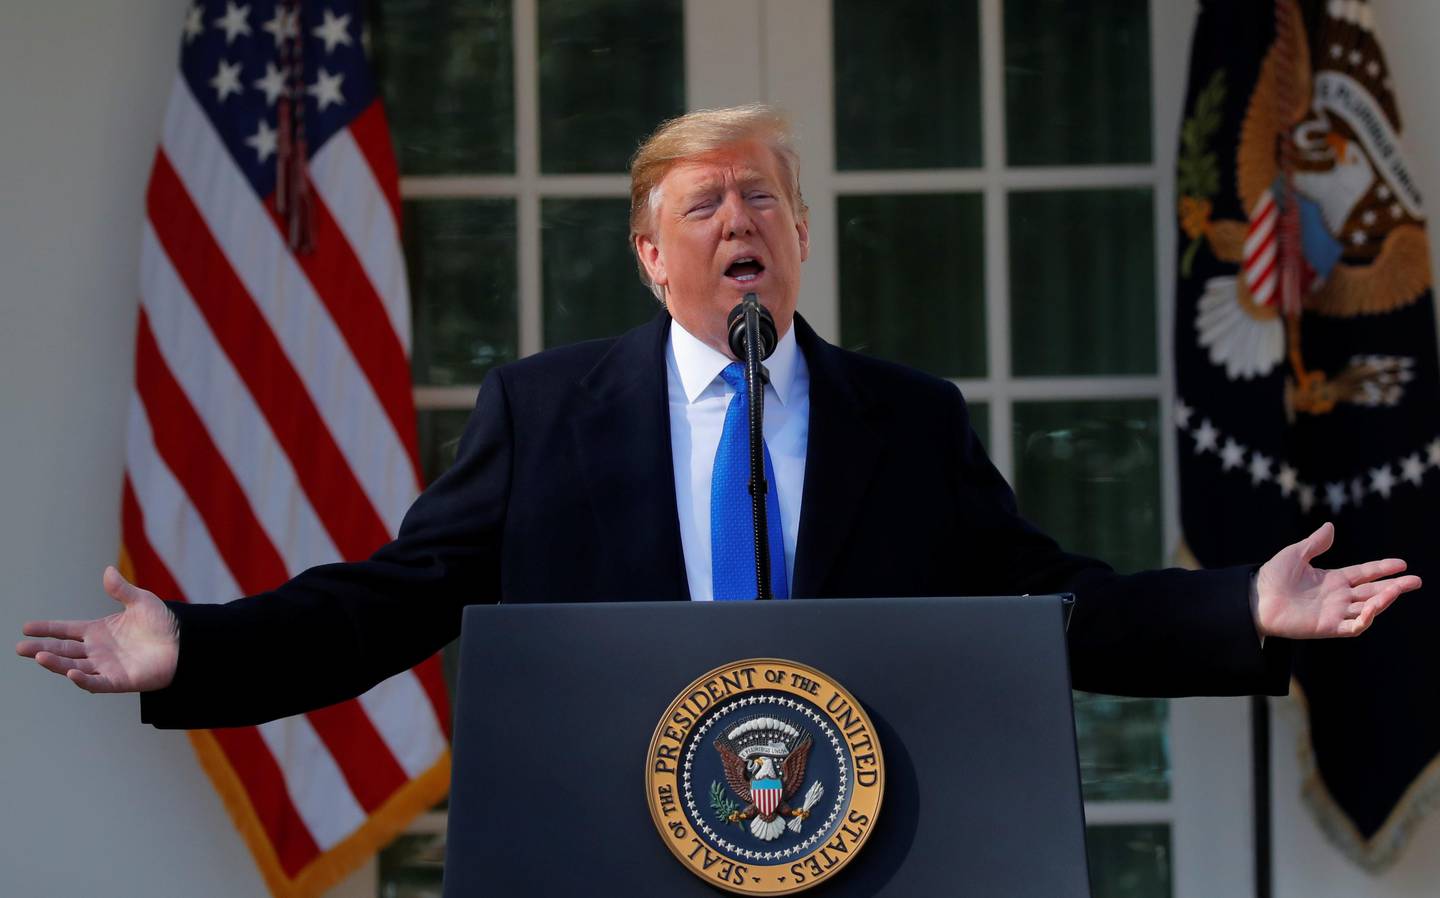 U.S. President Donald Trump declares a national emergency at the U.S.-Mexico border as he speaks about border security in the Rose Garden of the White House in Washington, U.S., February 15, 2019. REUTERS/Carlos Barria